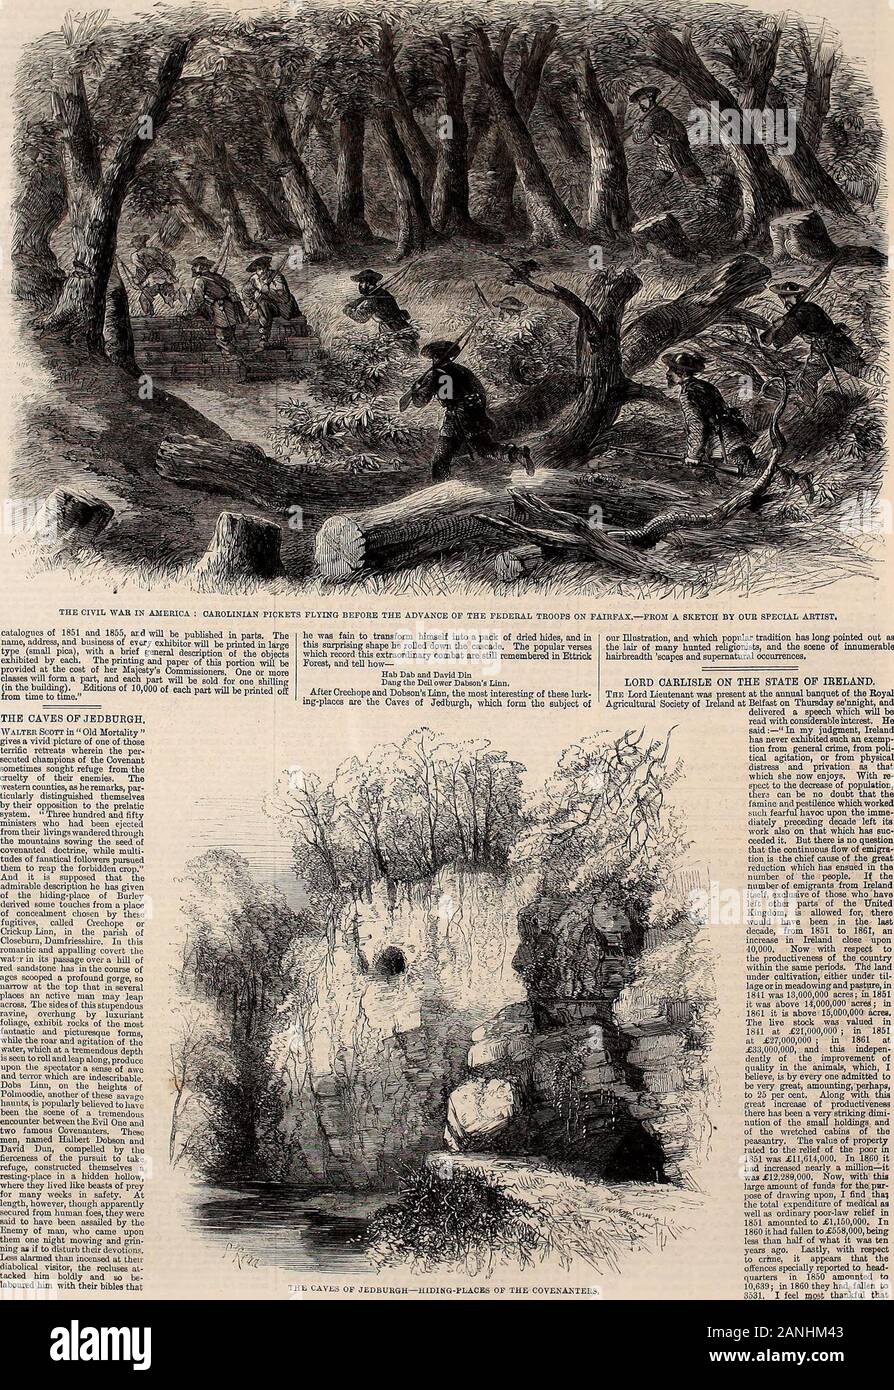 The illustrated London news . THE ILLUSTRATED LONDON NEWS. diabolical visitor,tacked him boldly and so be^i him with their bibles thai THE ILLUSTRATED LONDON NEWS if.m-./h ? v.iV, ng that great people, •i-.;=u with us acro^ tli f every form of peaceful agricul- I of n&gt;-tiling hut m i-ked h:i,te:ie-1 the Ii.rcu charge and the panici will enable us ami oHiei friendly : friendly media- llr.li, it: in vd- not Ua :n:?!-- -:. v.-hi-li e.-otild be f ar hotter, compose theirPad Wid guilty nnnireh. ; bm., ho-.vover ii,:il may b.-, 1 tm-t. gentlemen.,that we ;it lee.-r, v.ih humble :.in.! hopeii-l hc Stock Photo